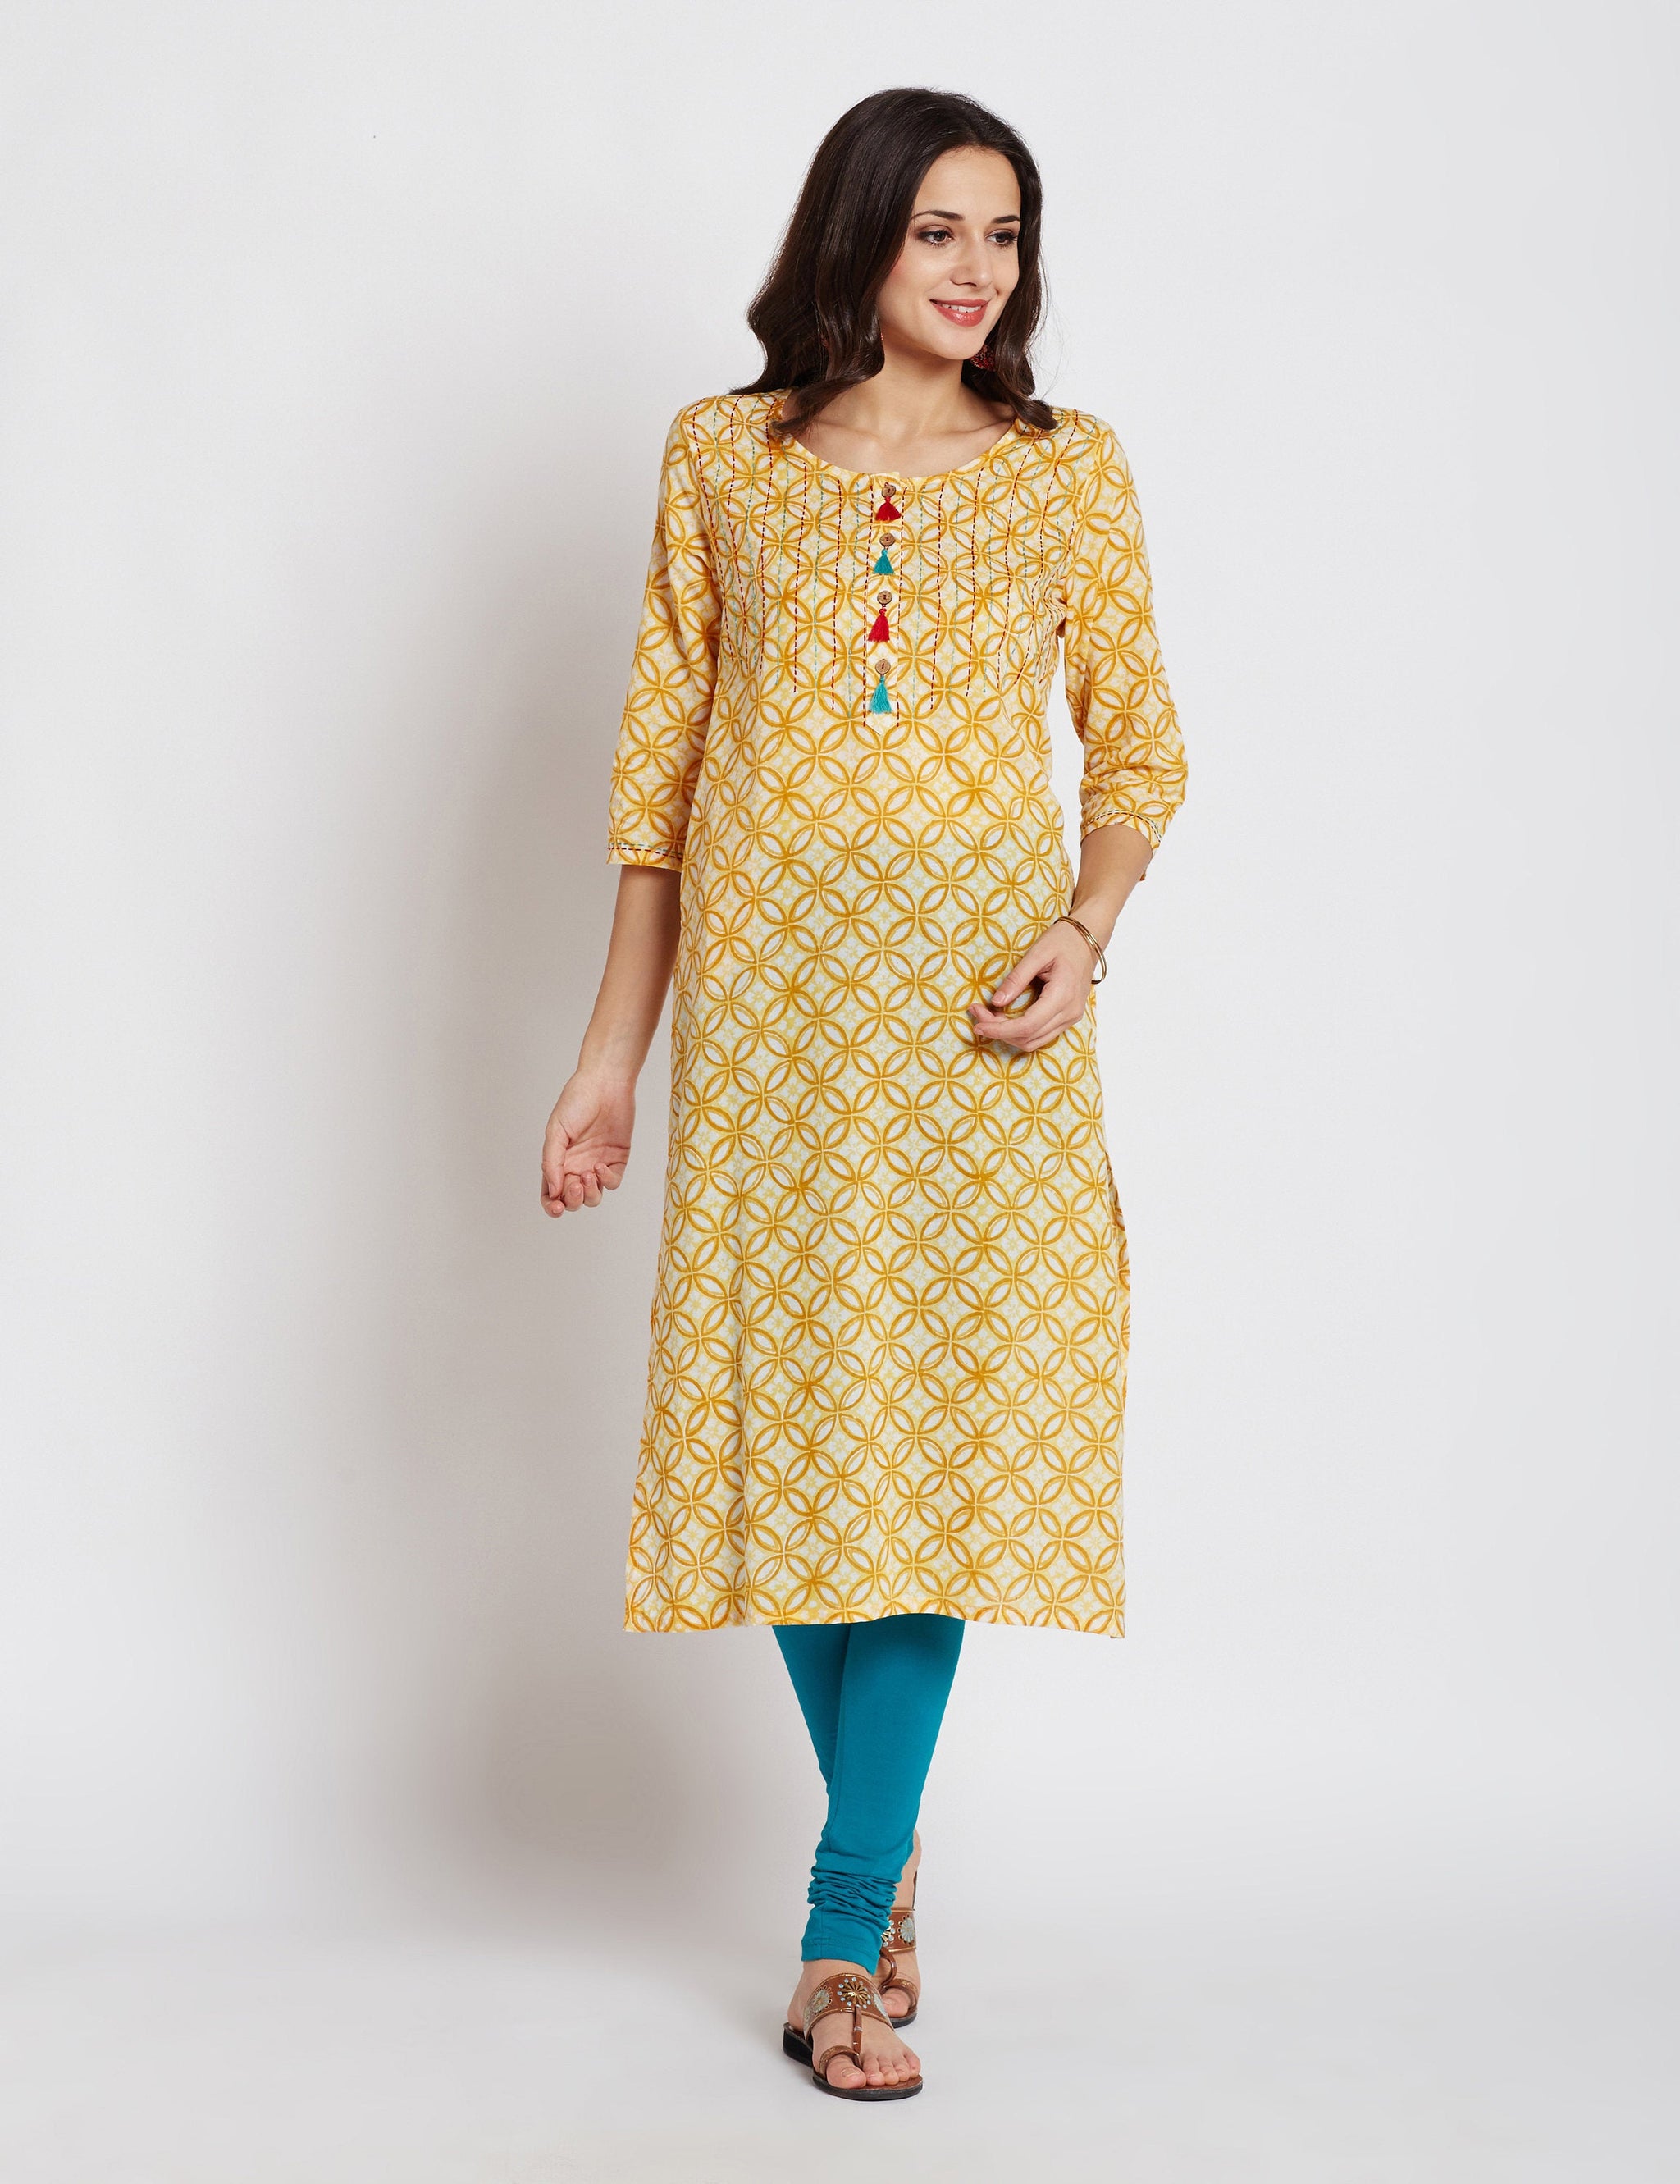 Hand block printed ethnic long Indian pocket kurta with kantha hand embroidery & tassels on front placket